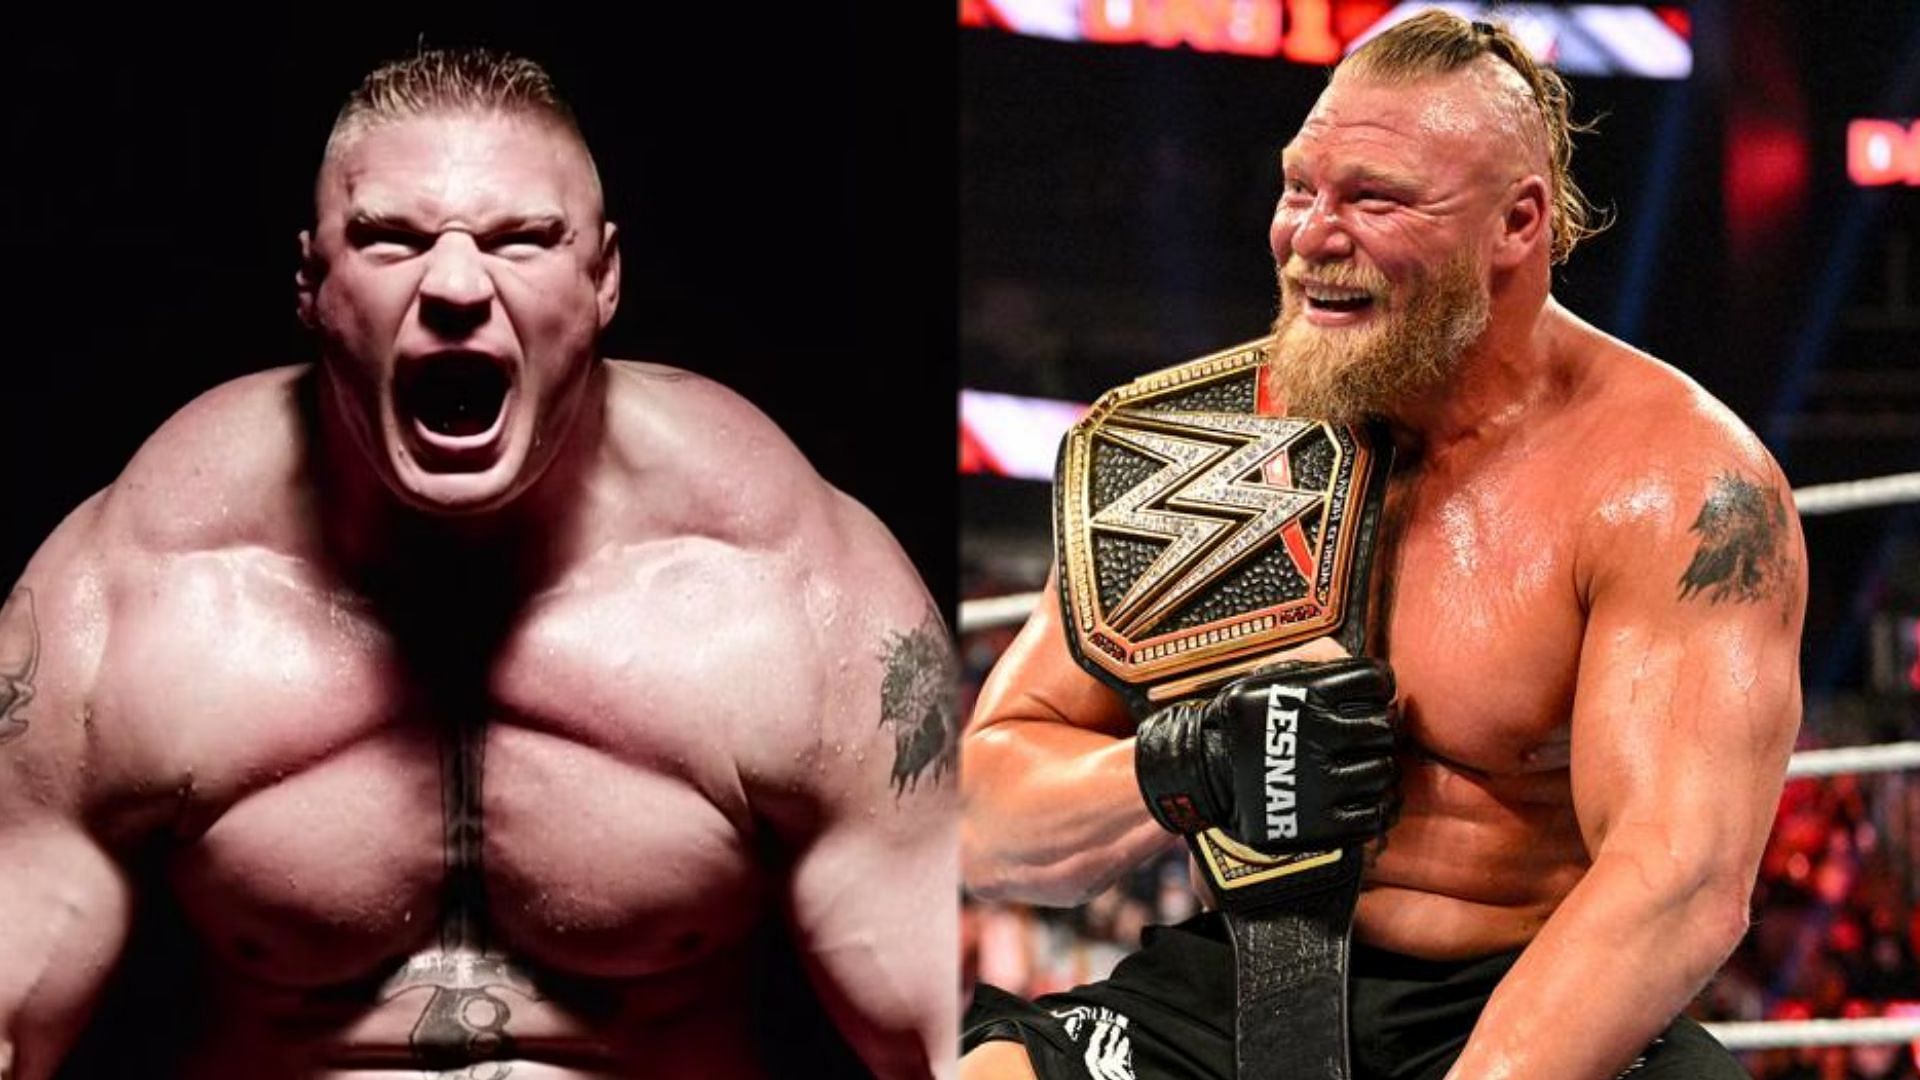 Is Brock Lesnar the most intimidating man in pro wrestler?